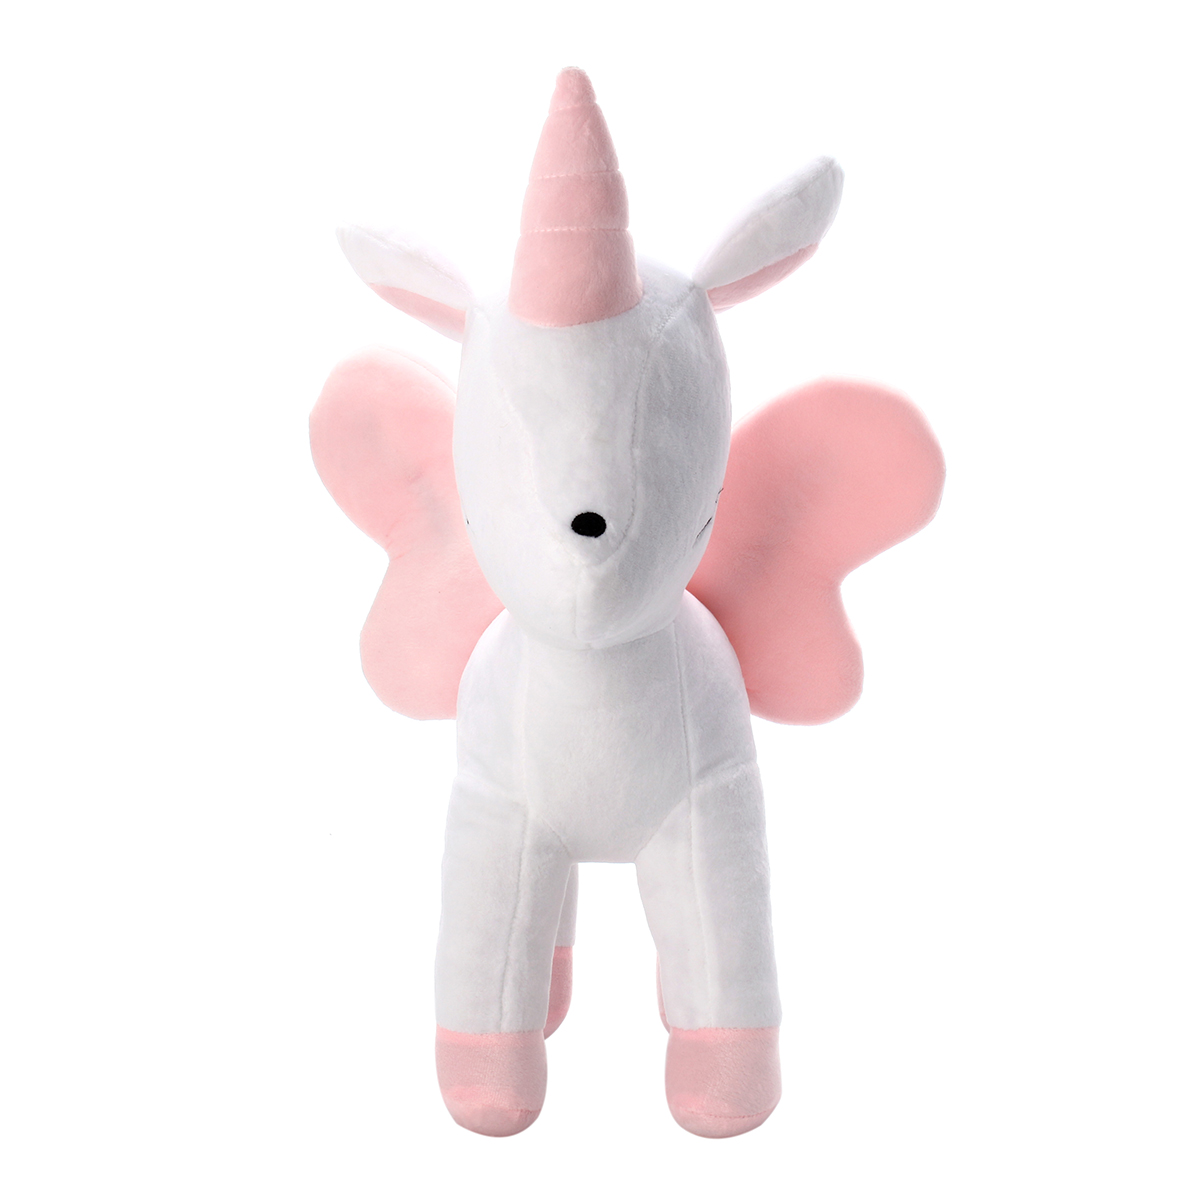 16-Inches-Soft-Giant-Unicorn-Stuffed-Plush-Toy-Animal-Doll-Children-Gifts-Photo-Props-Gift-1299365-8